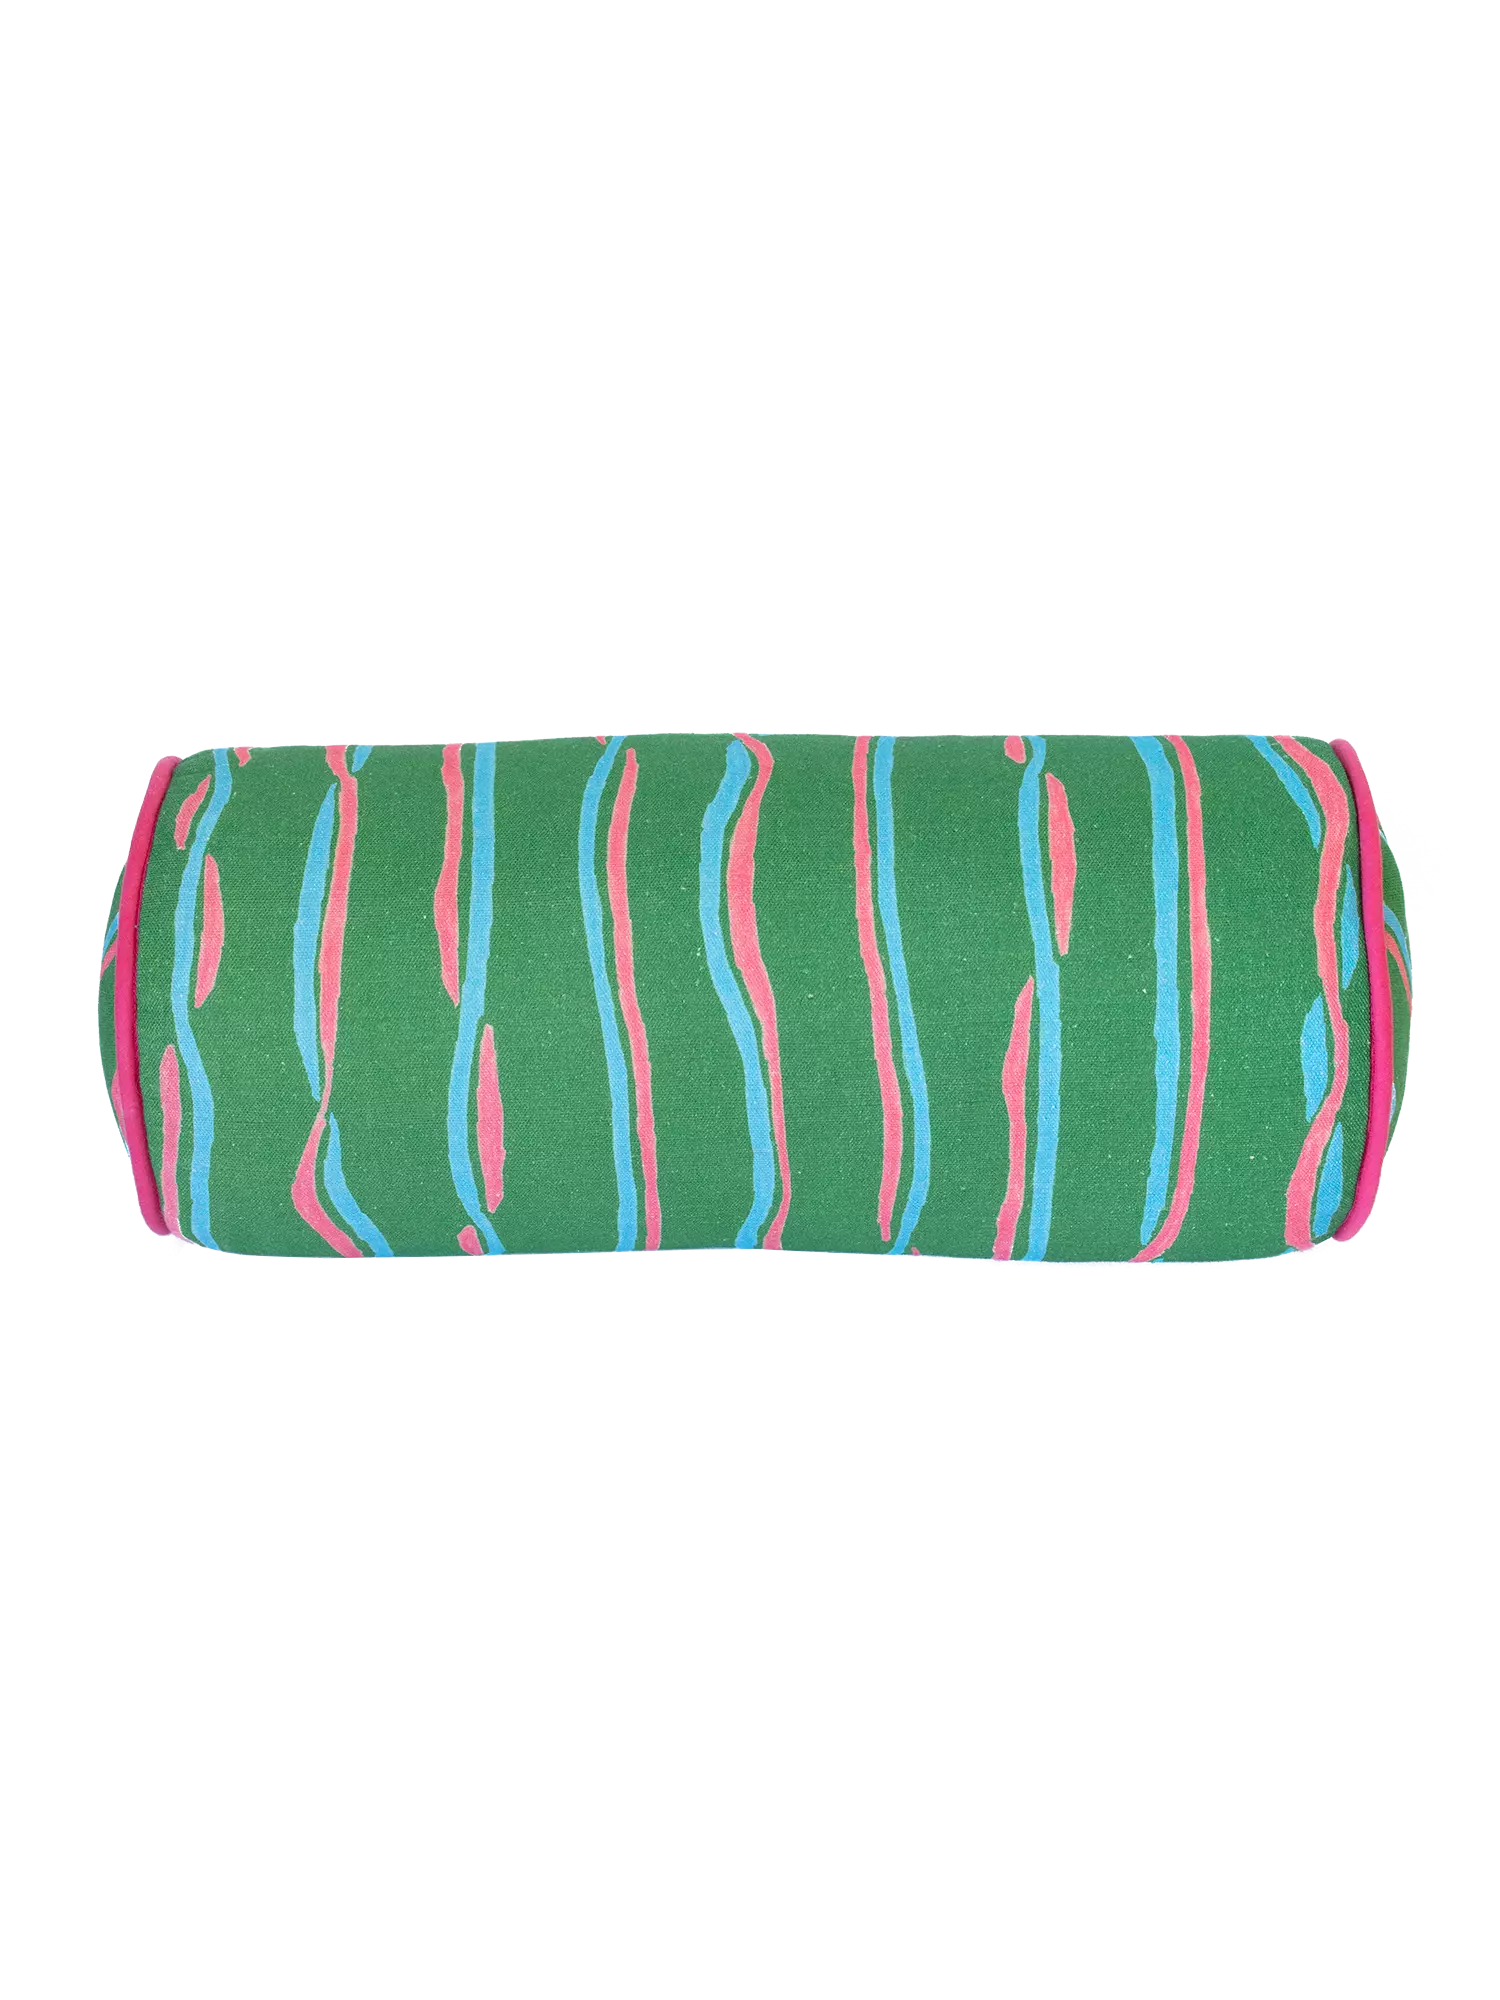 Hand-finished Regency Stripe-inspired bolster by artist Susie Green. Linen fabric with a high-quality feather inner, pink and blue stripes on green